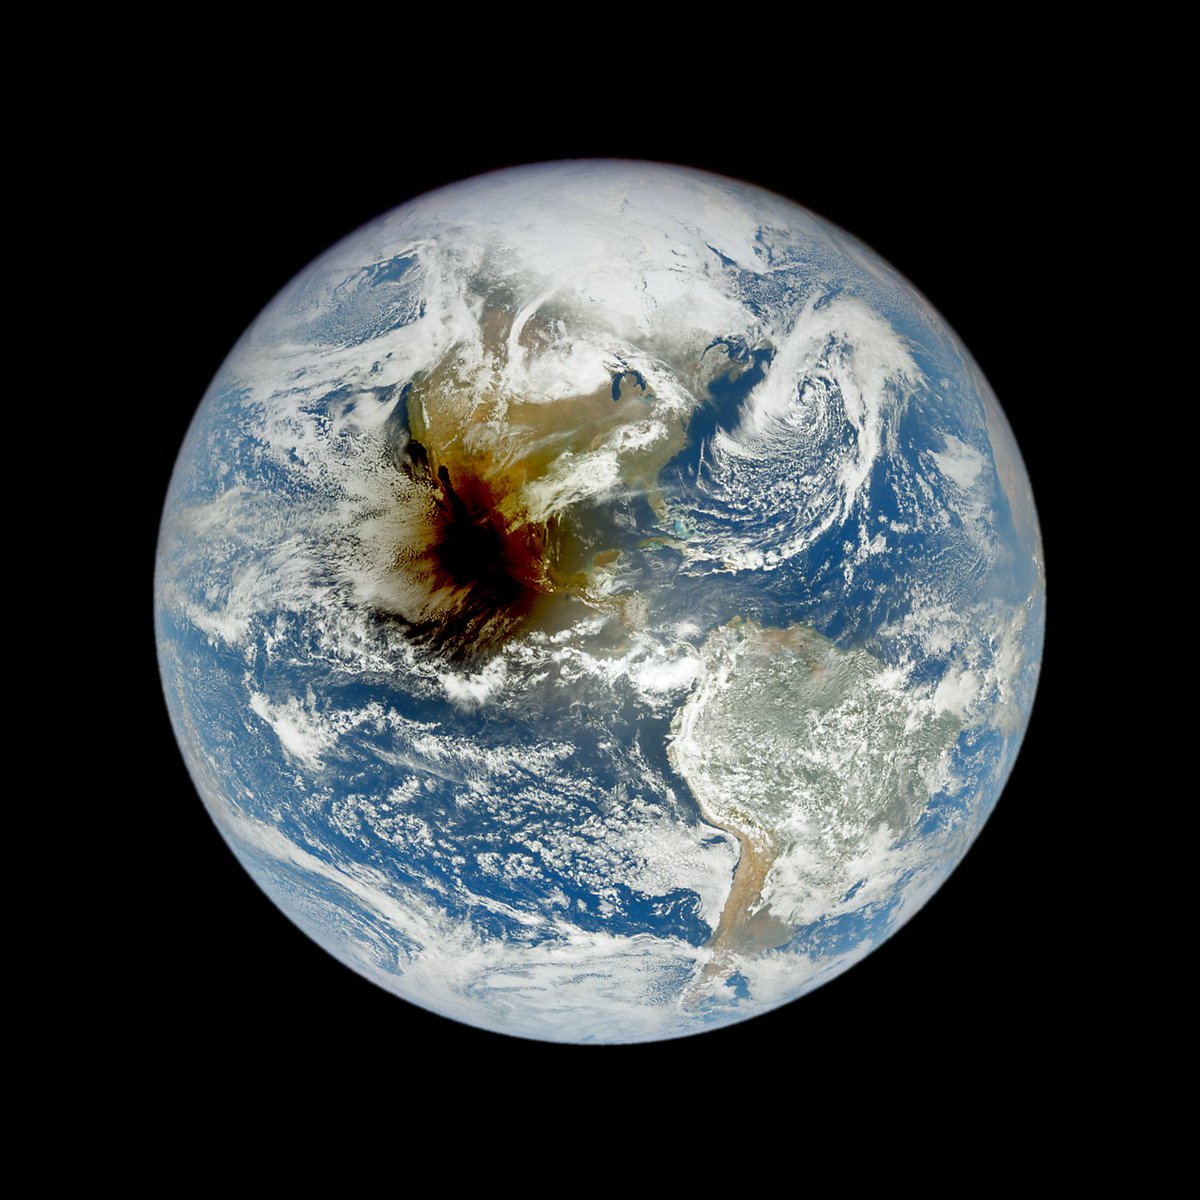 18:02 on Monday April 8th, over North America